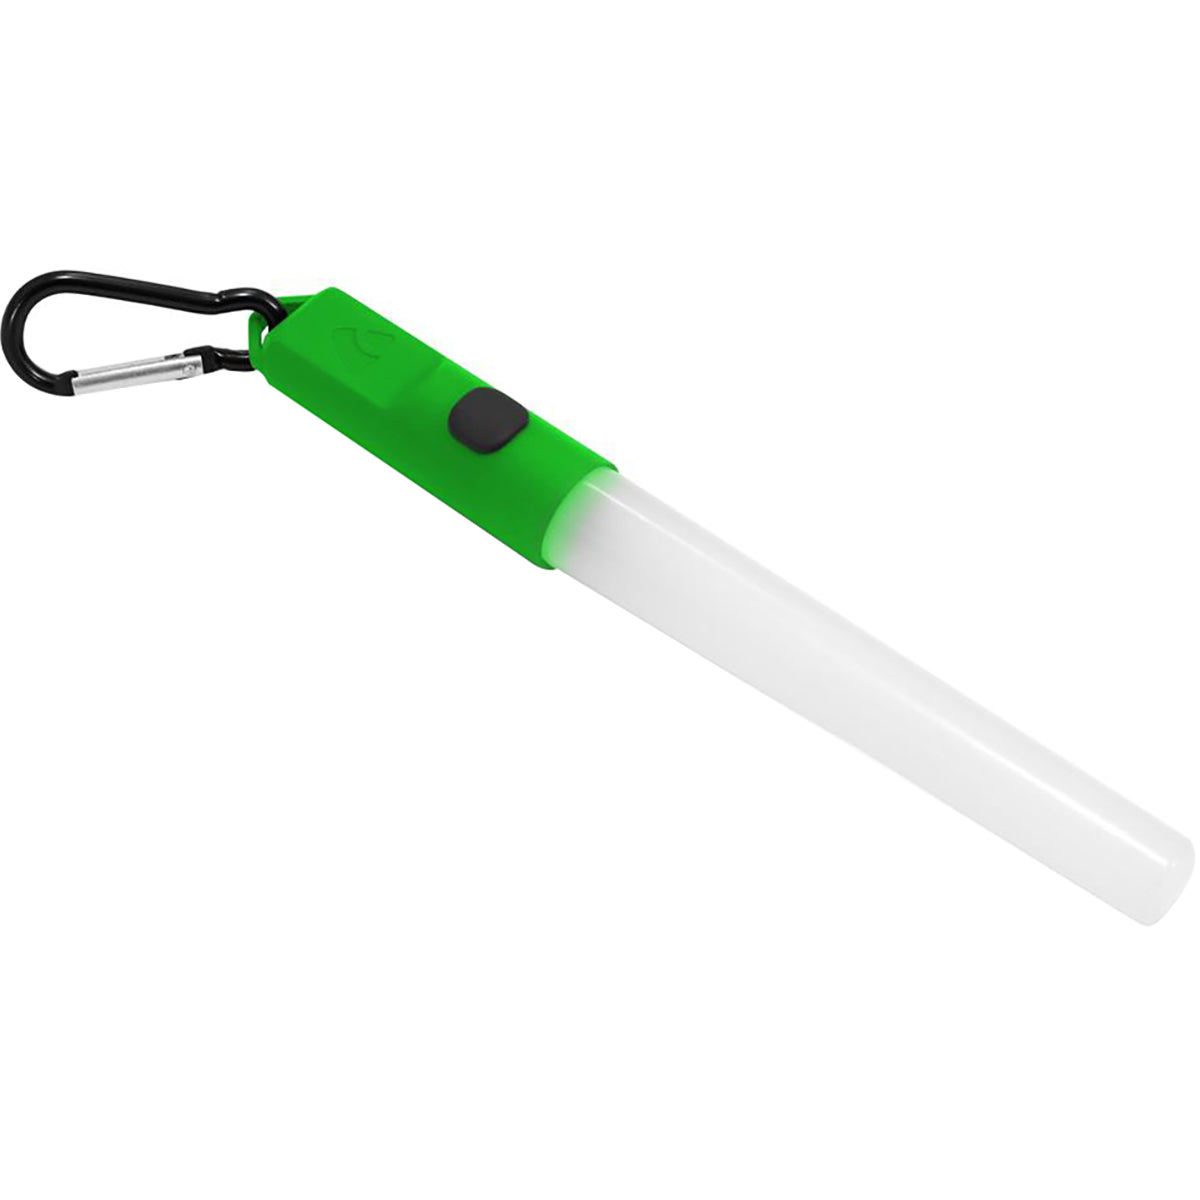 Coghlan's Outdoor Survival Emergency LED Lightstick for Camping, Hiking Coghlan's